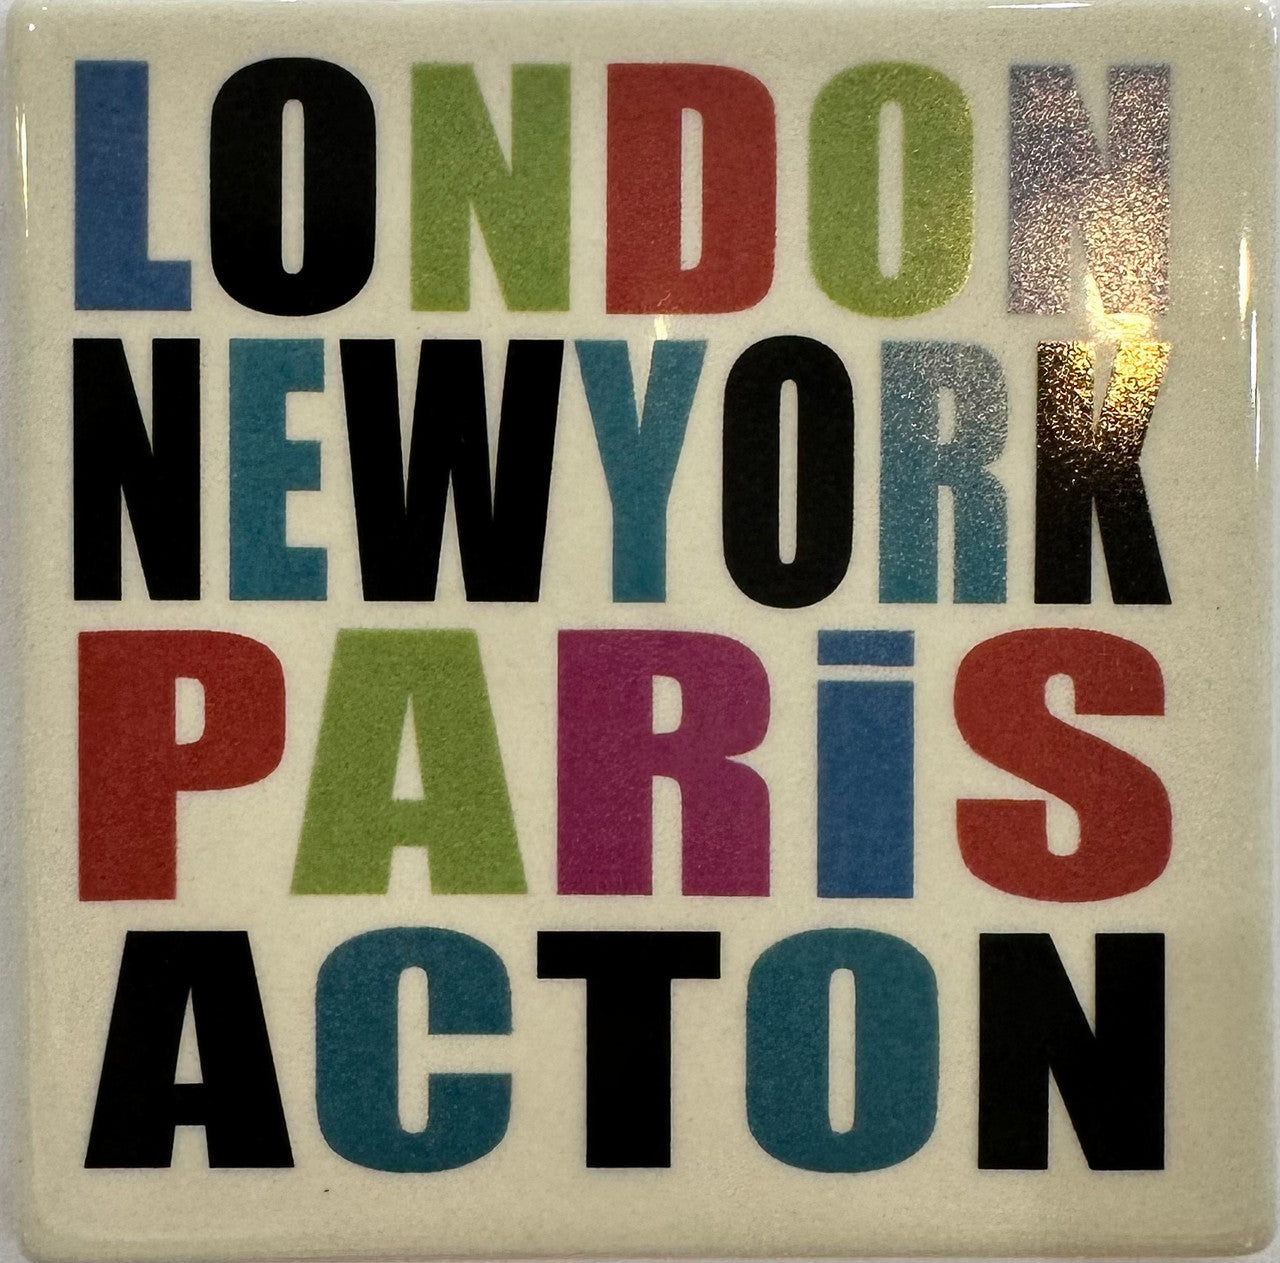 London, New York, Paris, Acton Coaster by Moorland Pottery